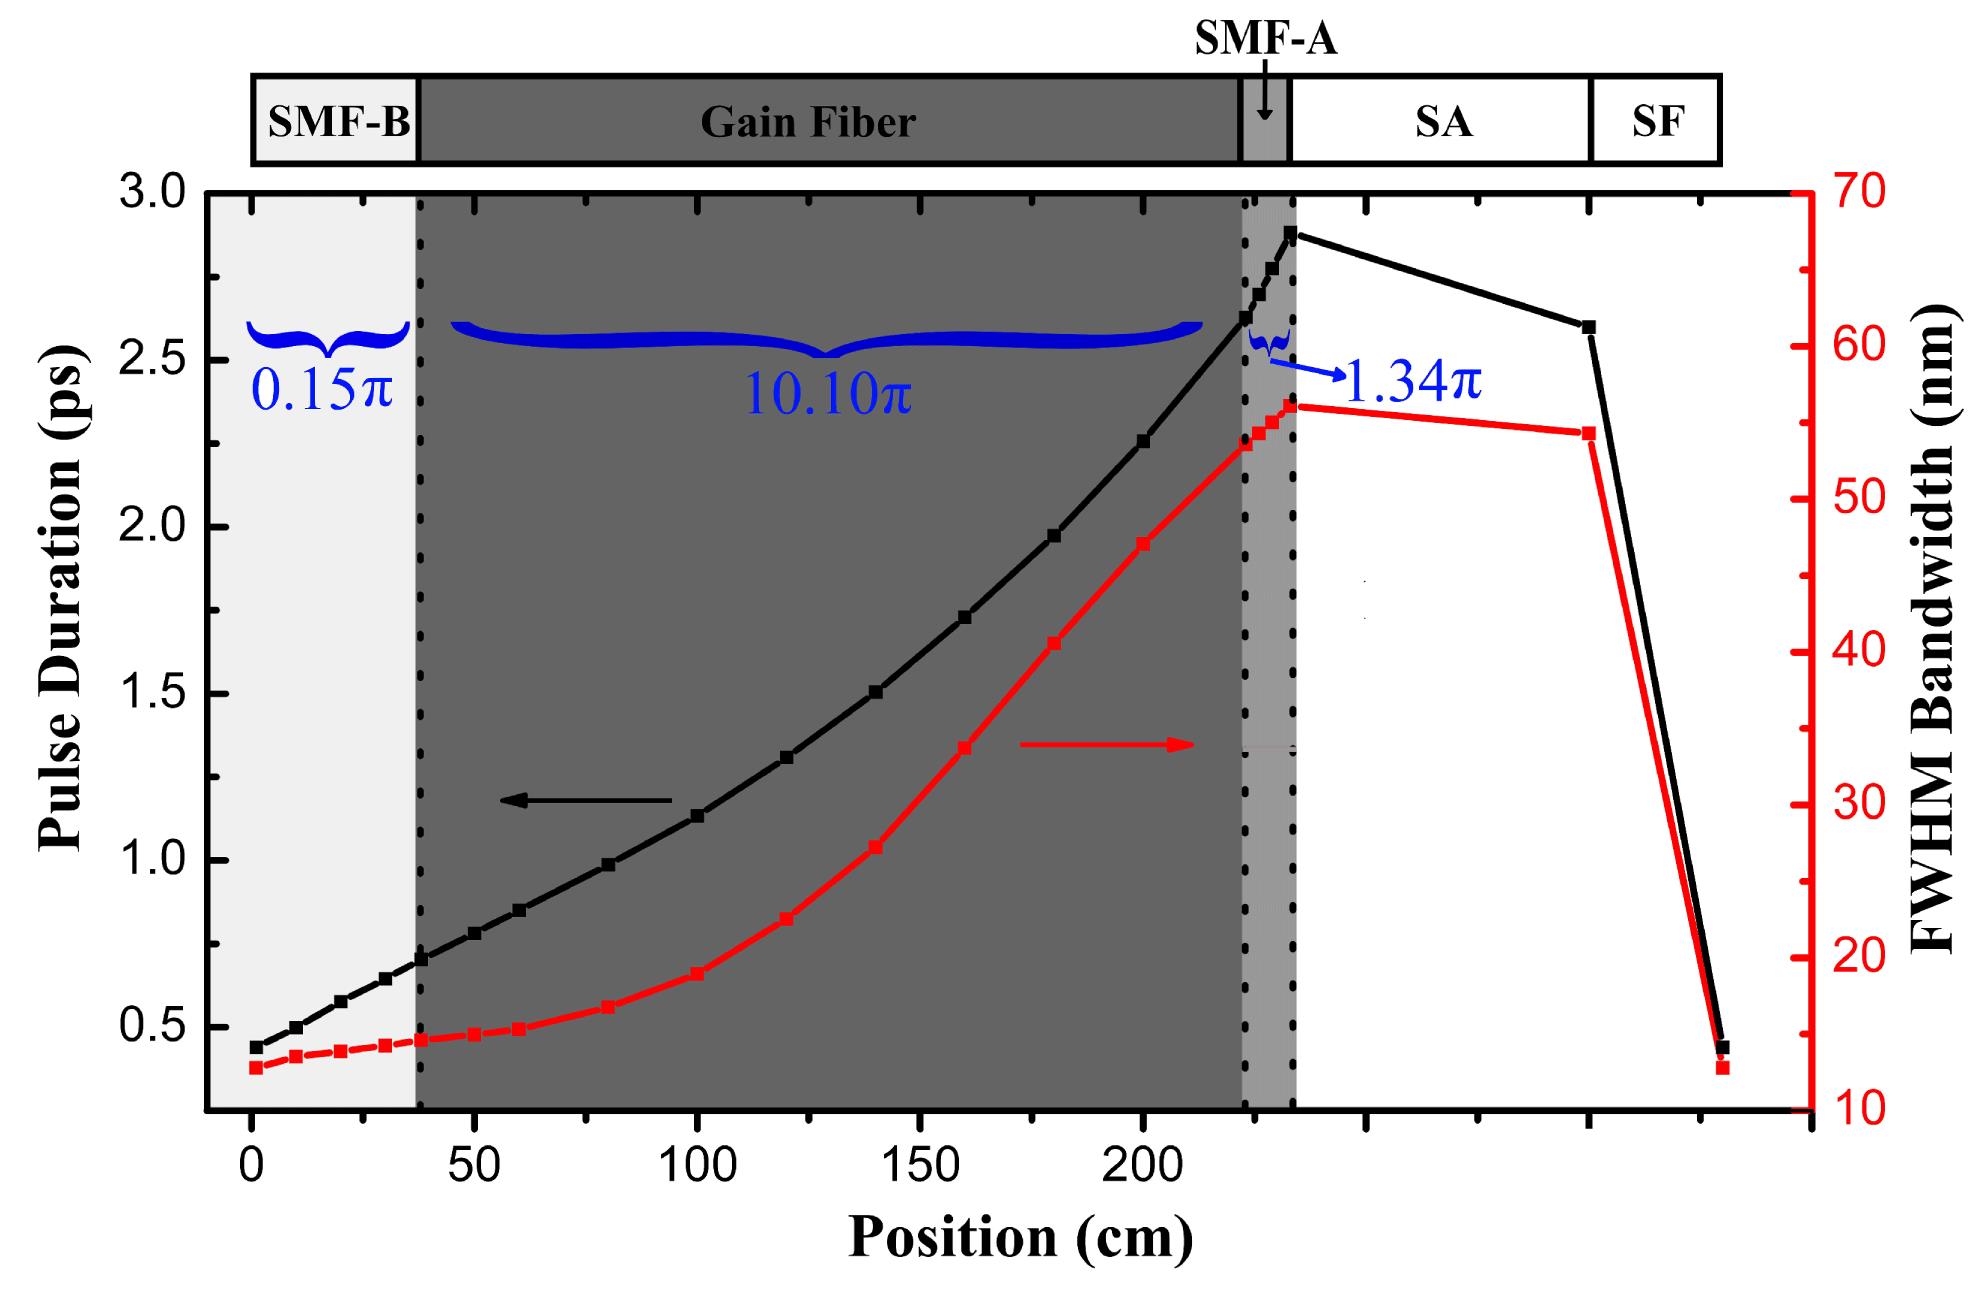 Numerical simulation results of spectral bandwidth and pulse duration evolution in the laser cavity; the pulse enters the SMF-B after the spectral filter (SF).